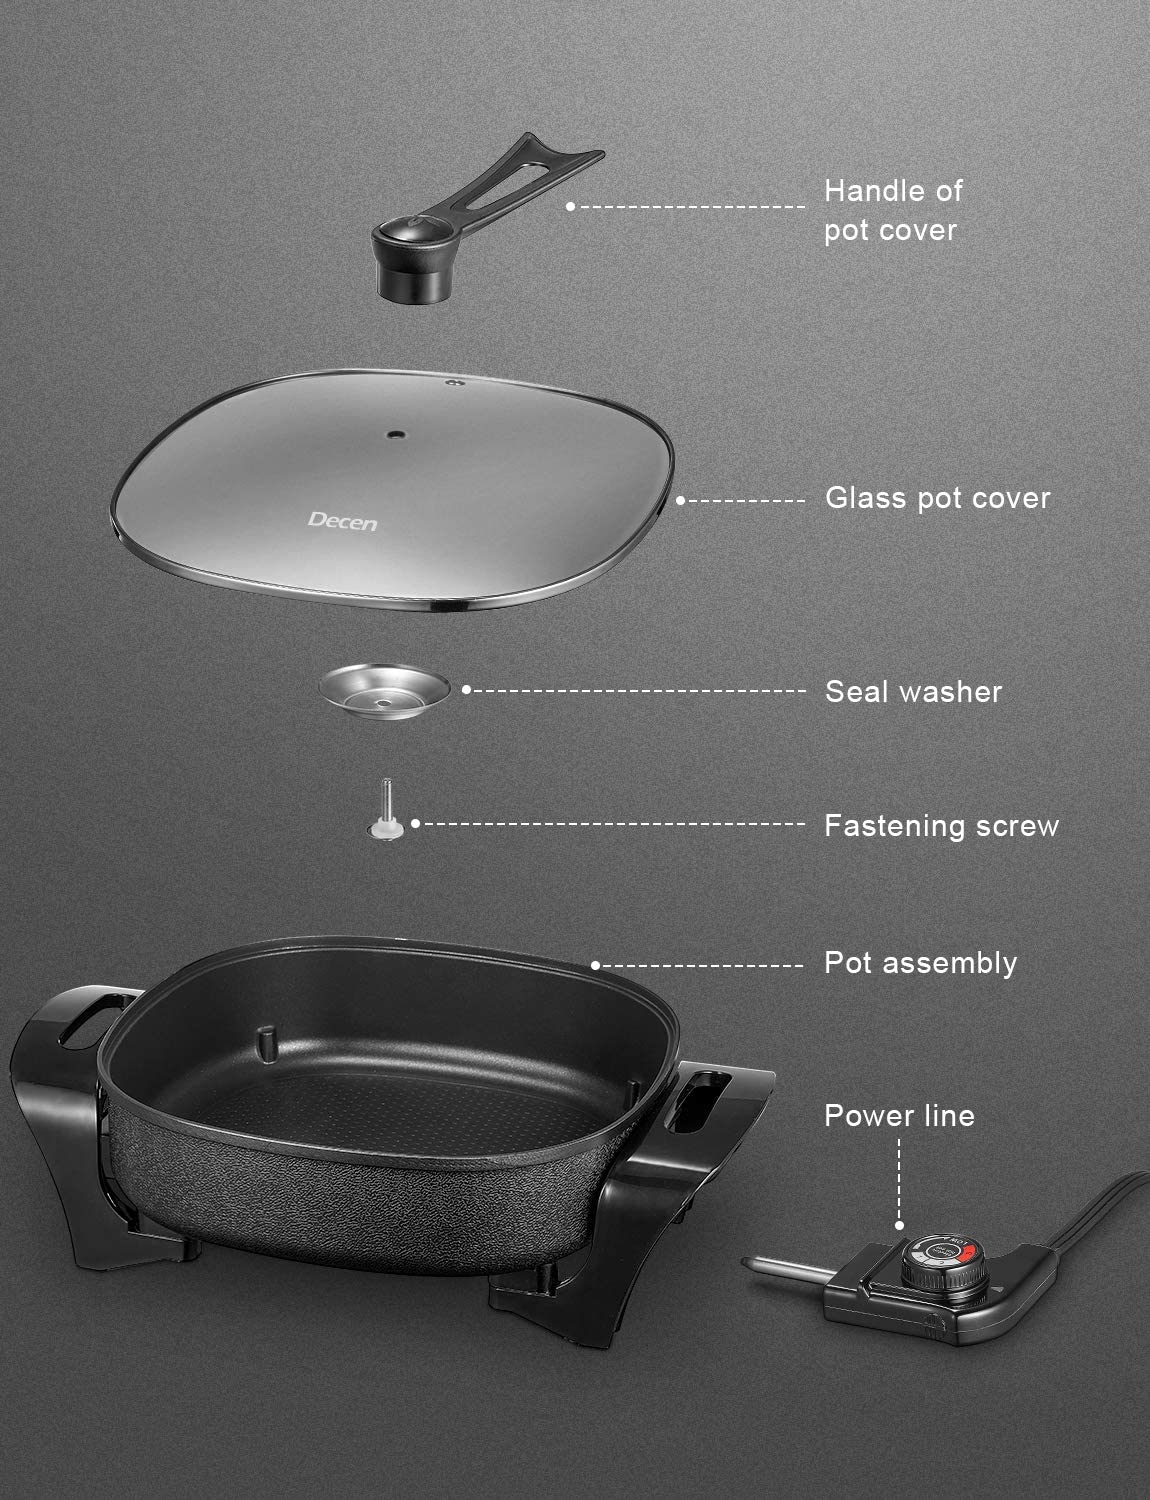 12-Inch Nonstick Electric Skillet - Family-Sized Serves 4 to 6 People